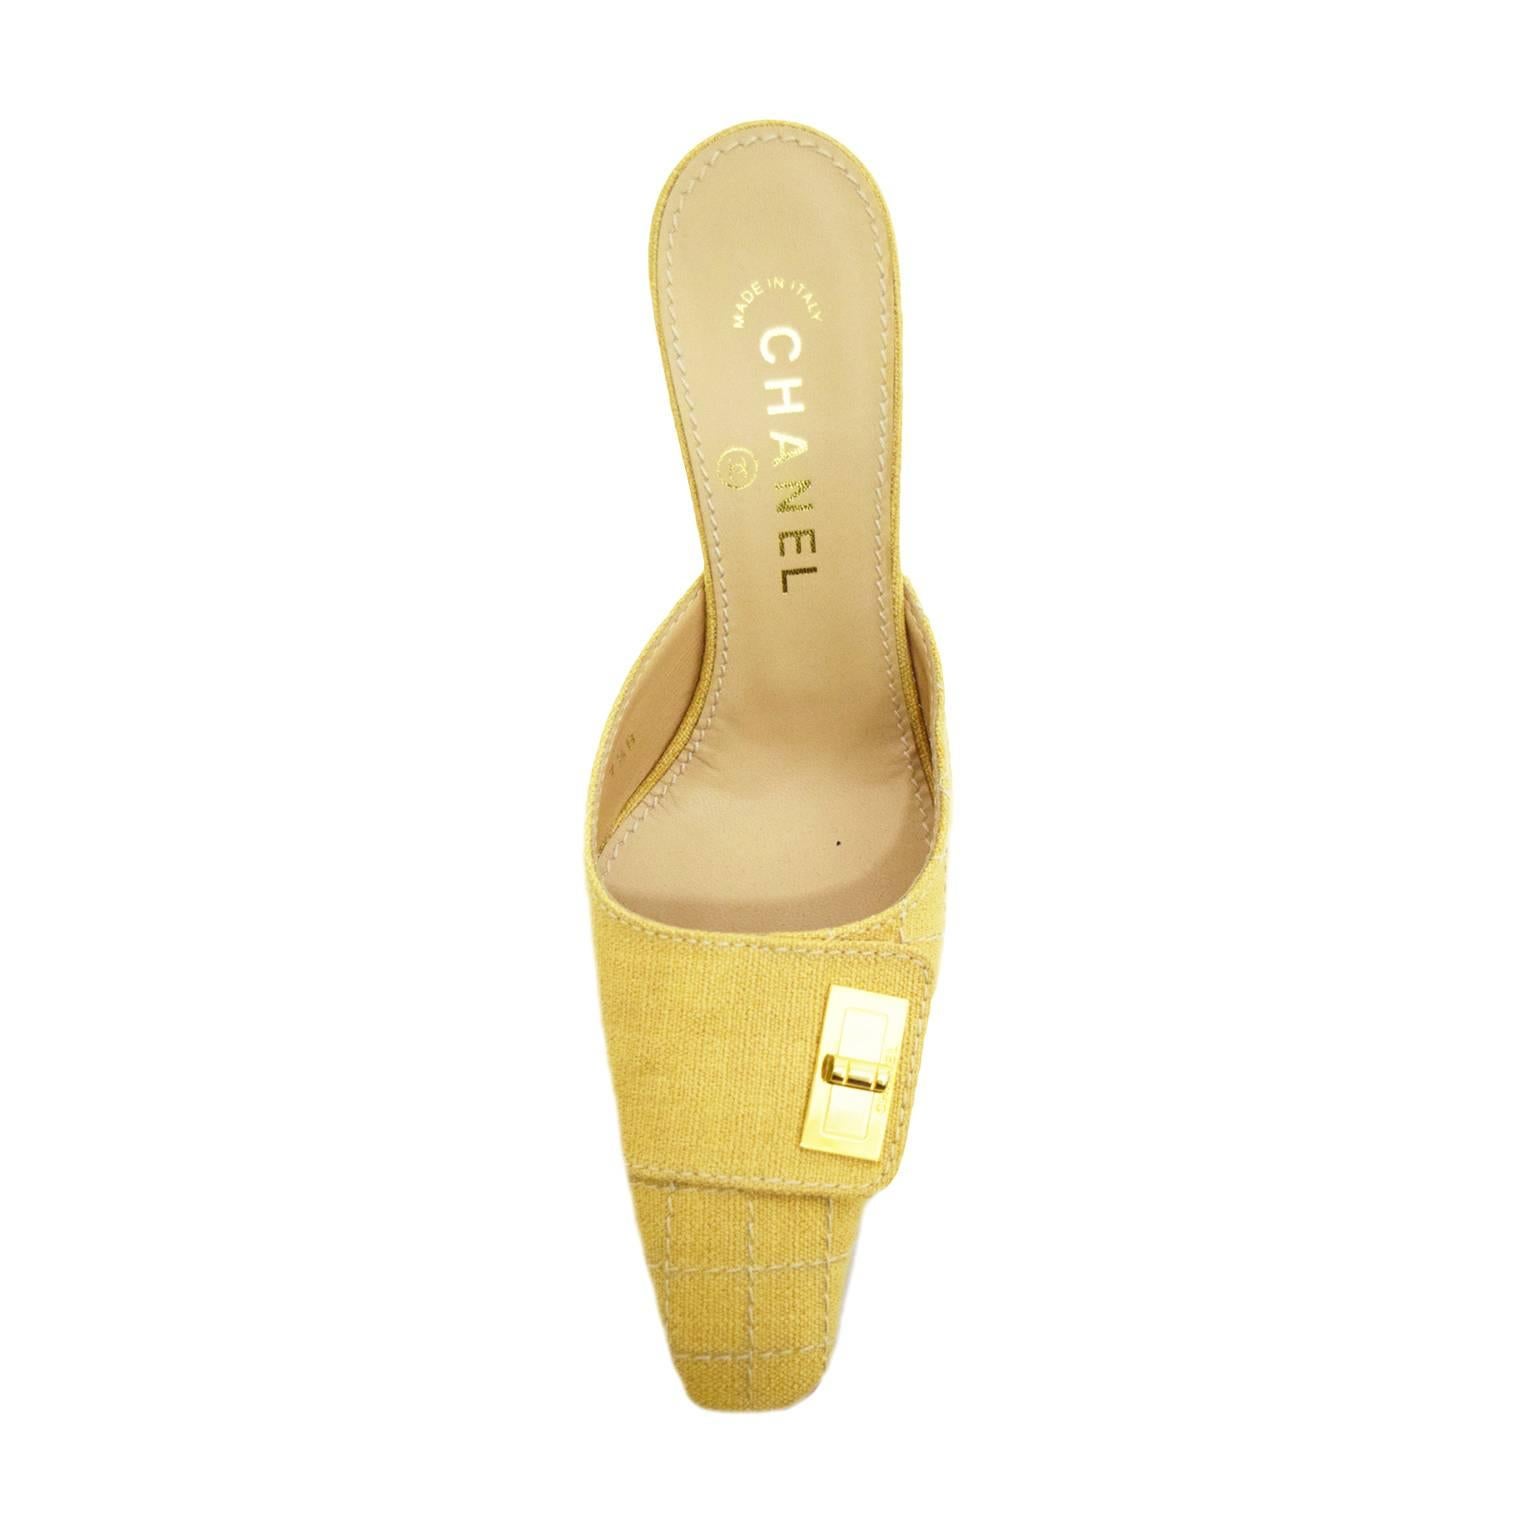 These classic Chanel mules are incased in a simplistic mustard and white woven tweed and have a top strap and gold hardware buckle for embellishment. Nude insole with 3 inch cuban heel.